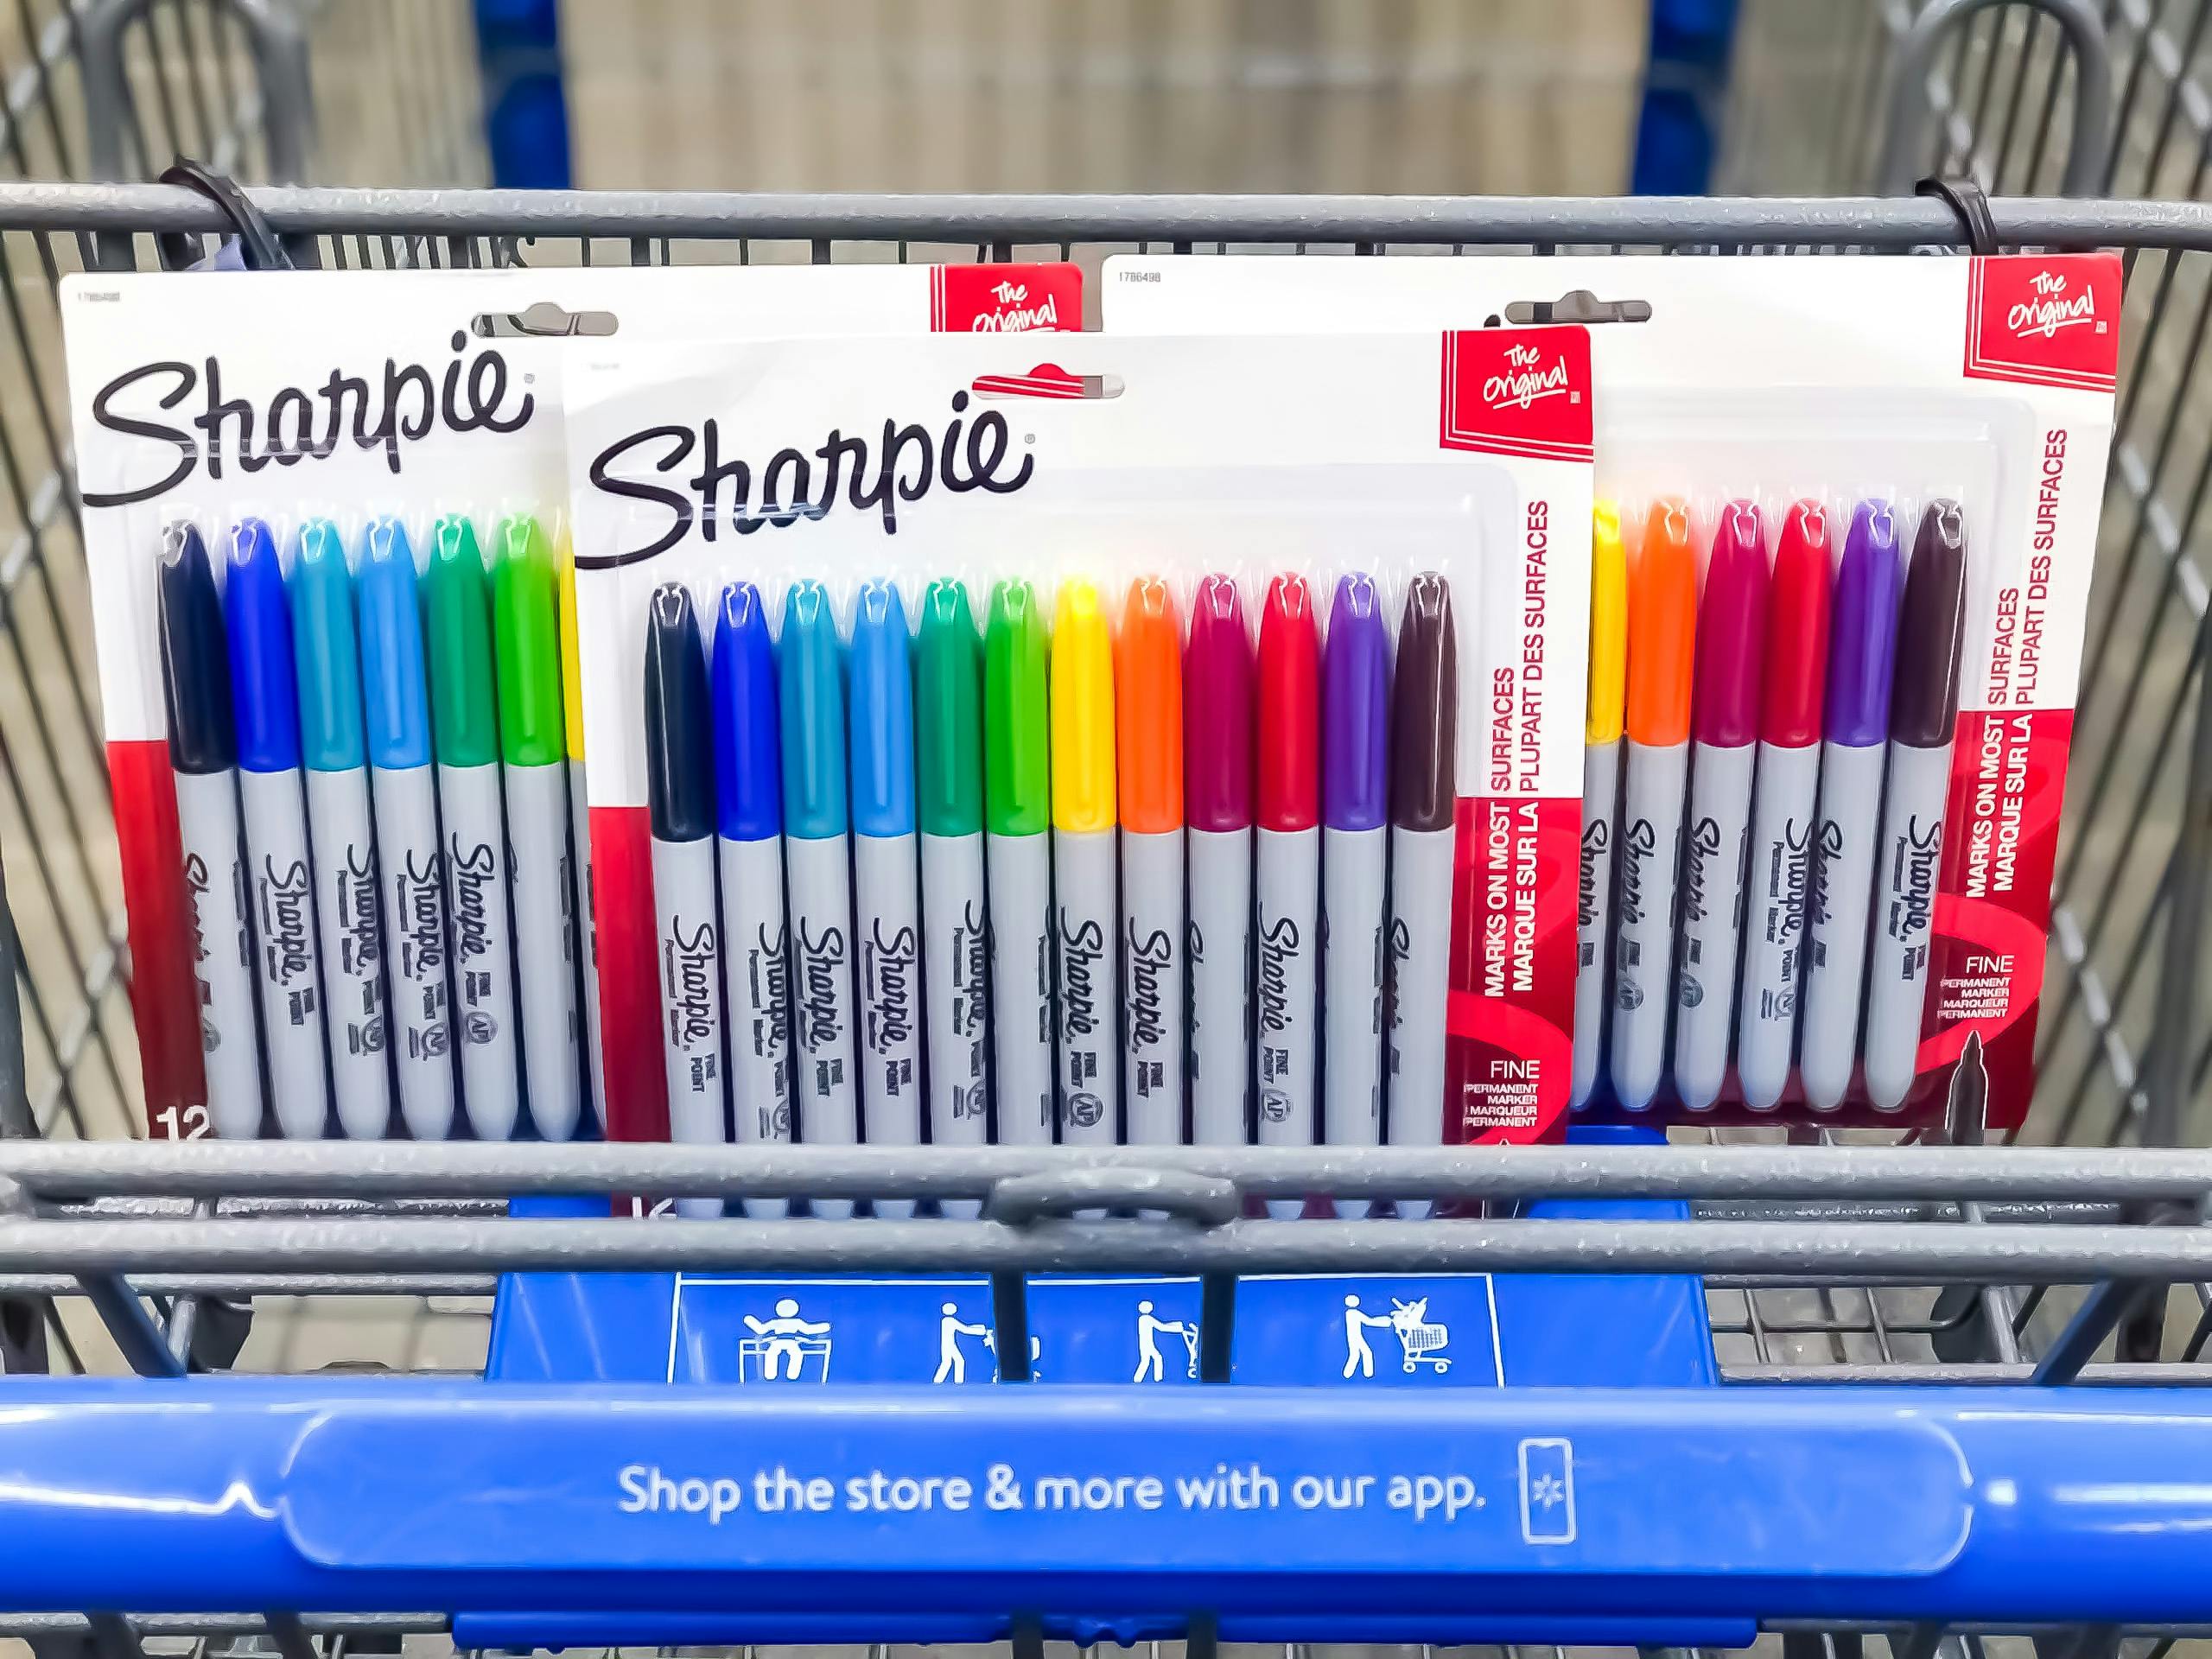 Sharpie Fine Point Permanent Markers - Assorted, 12 pk - Fry's Food Stores